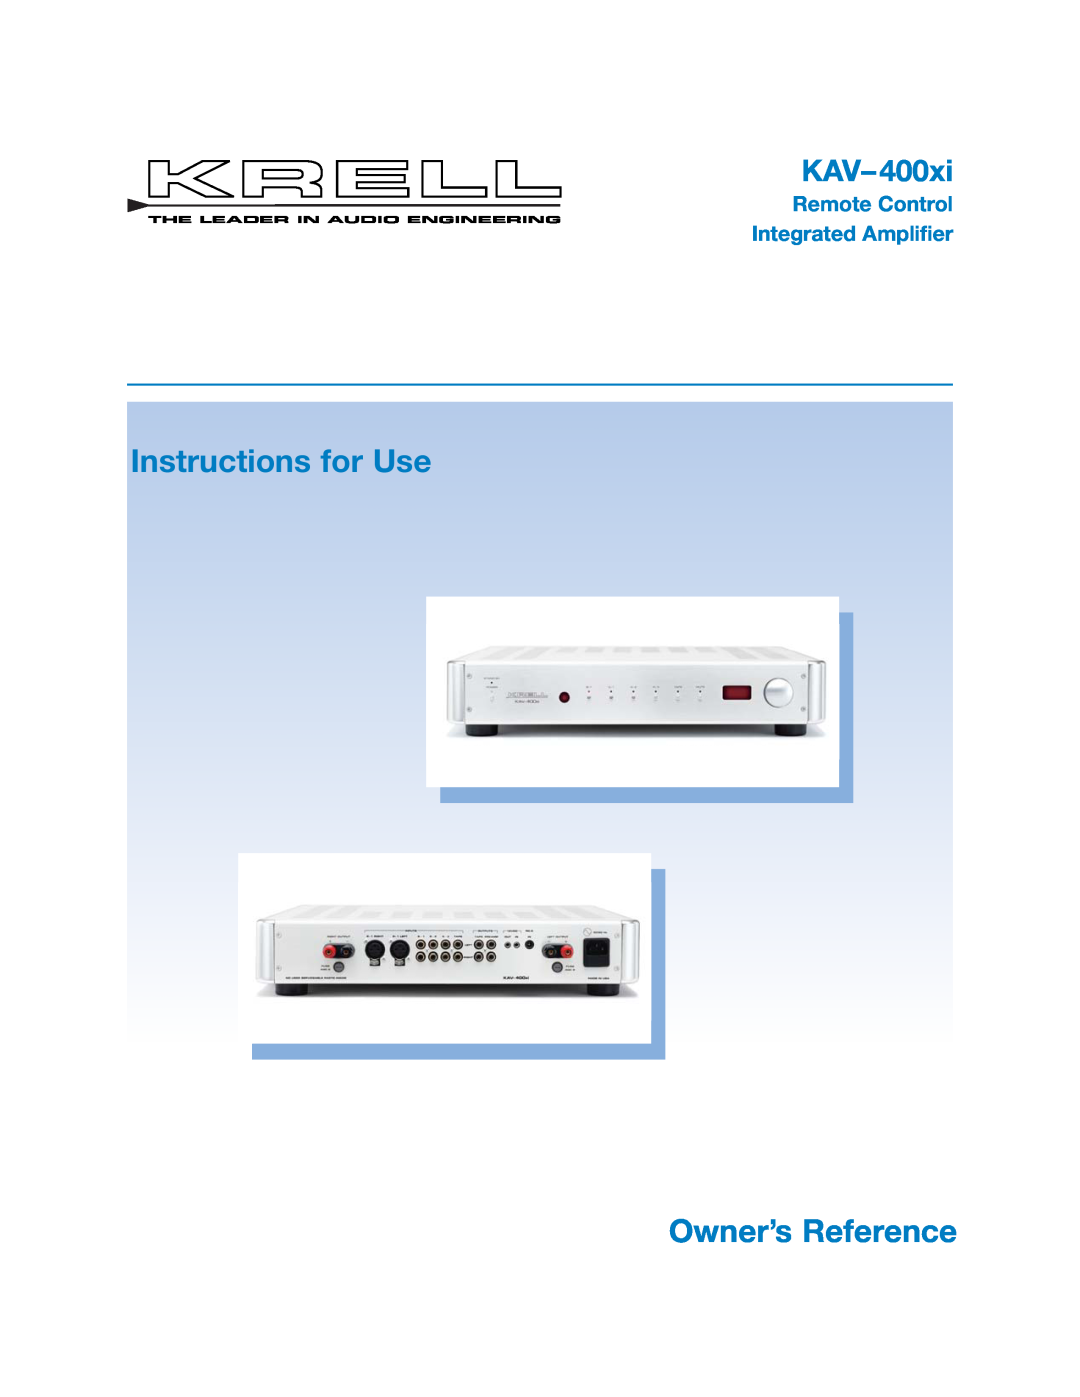 Krell Industries KAV400xi manual Instructions for Use, Owner’s Reference, KAV-400xi, Remote Control, Integrated Amplifier 